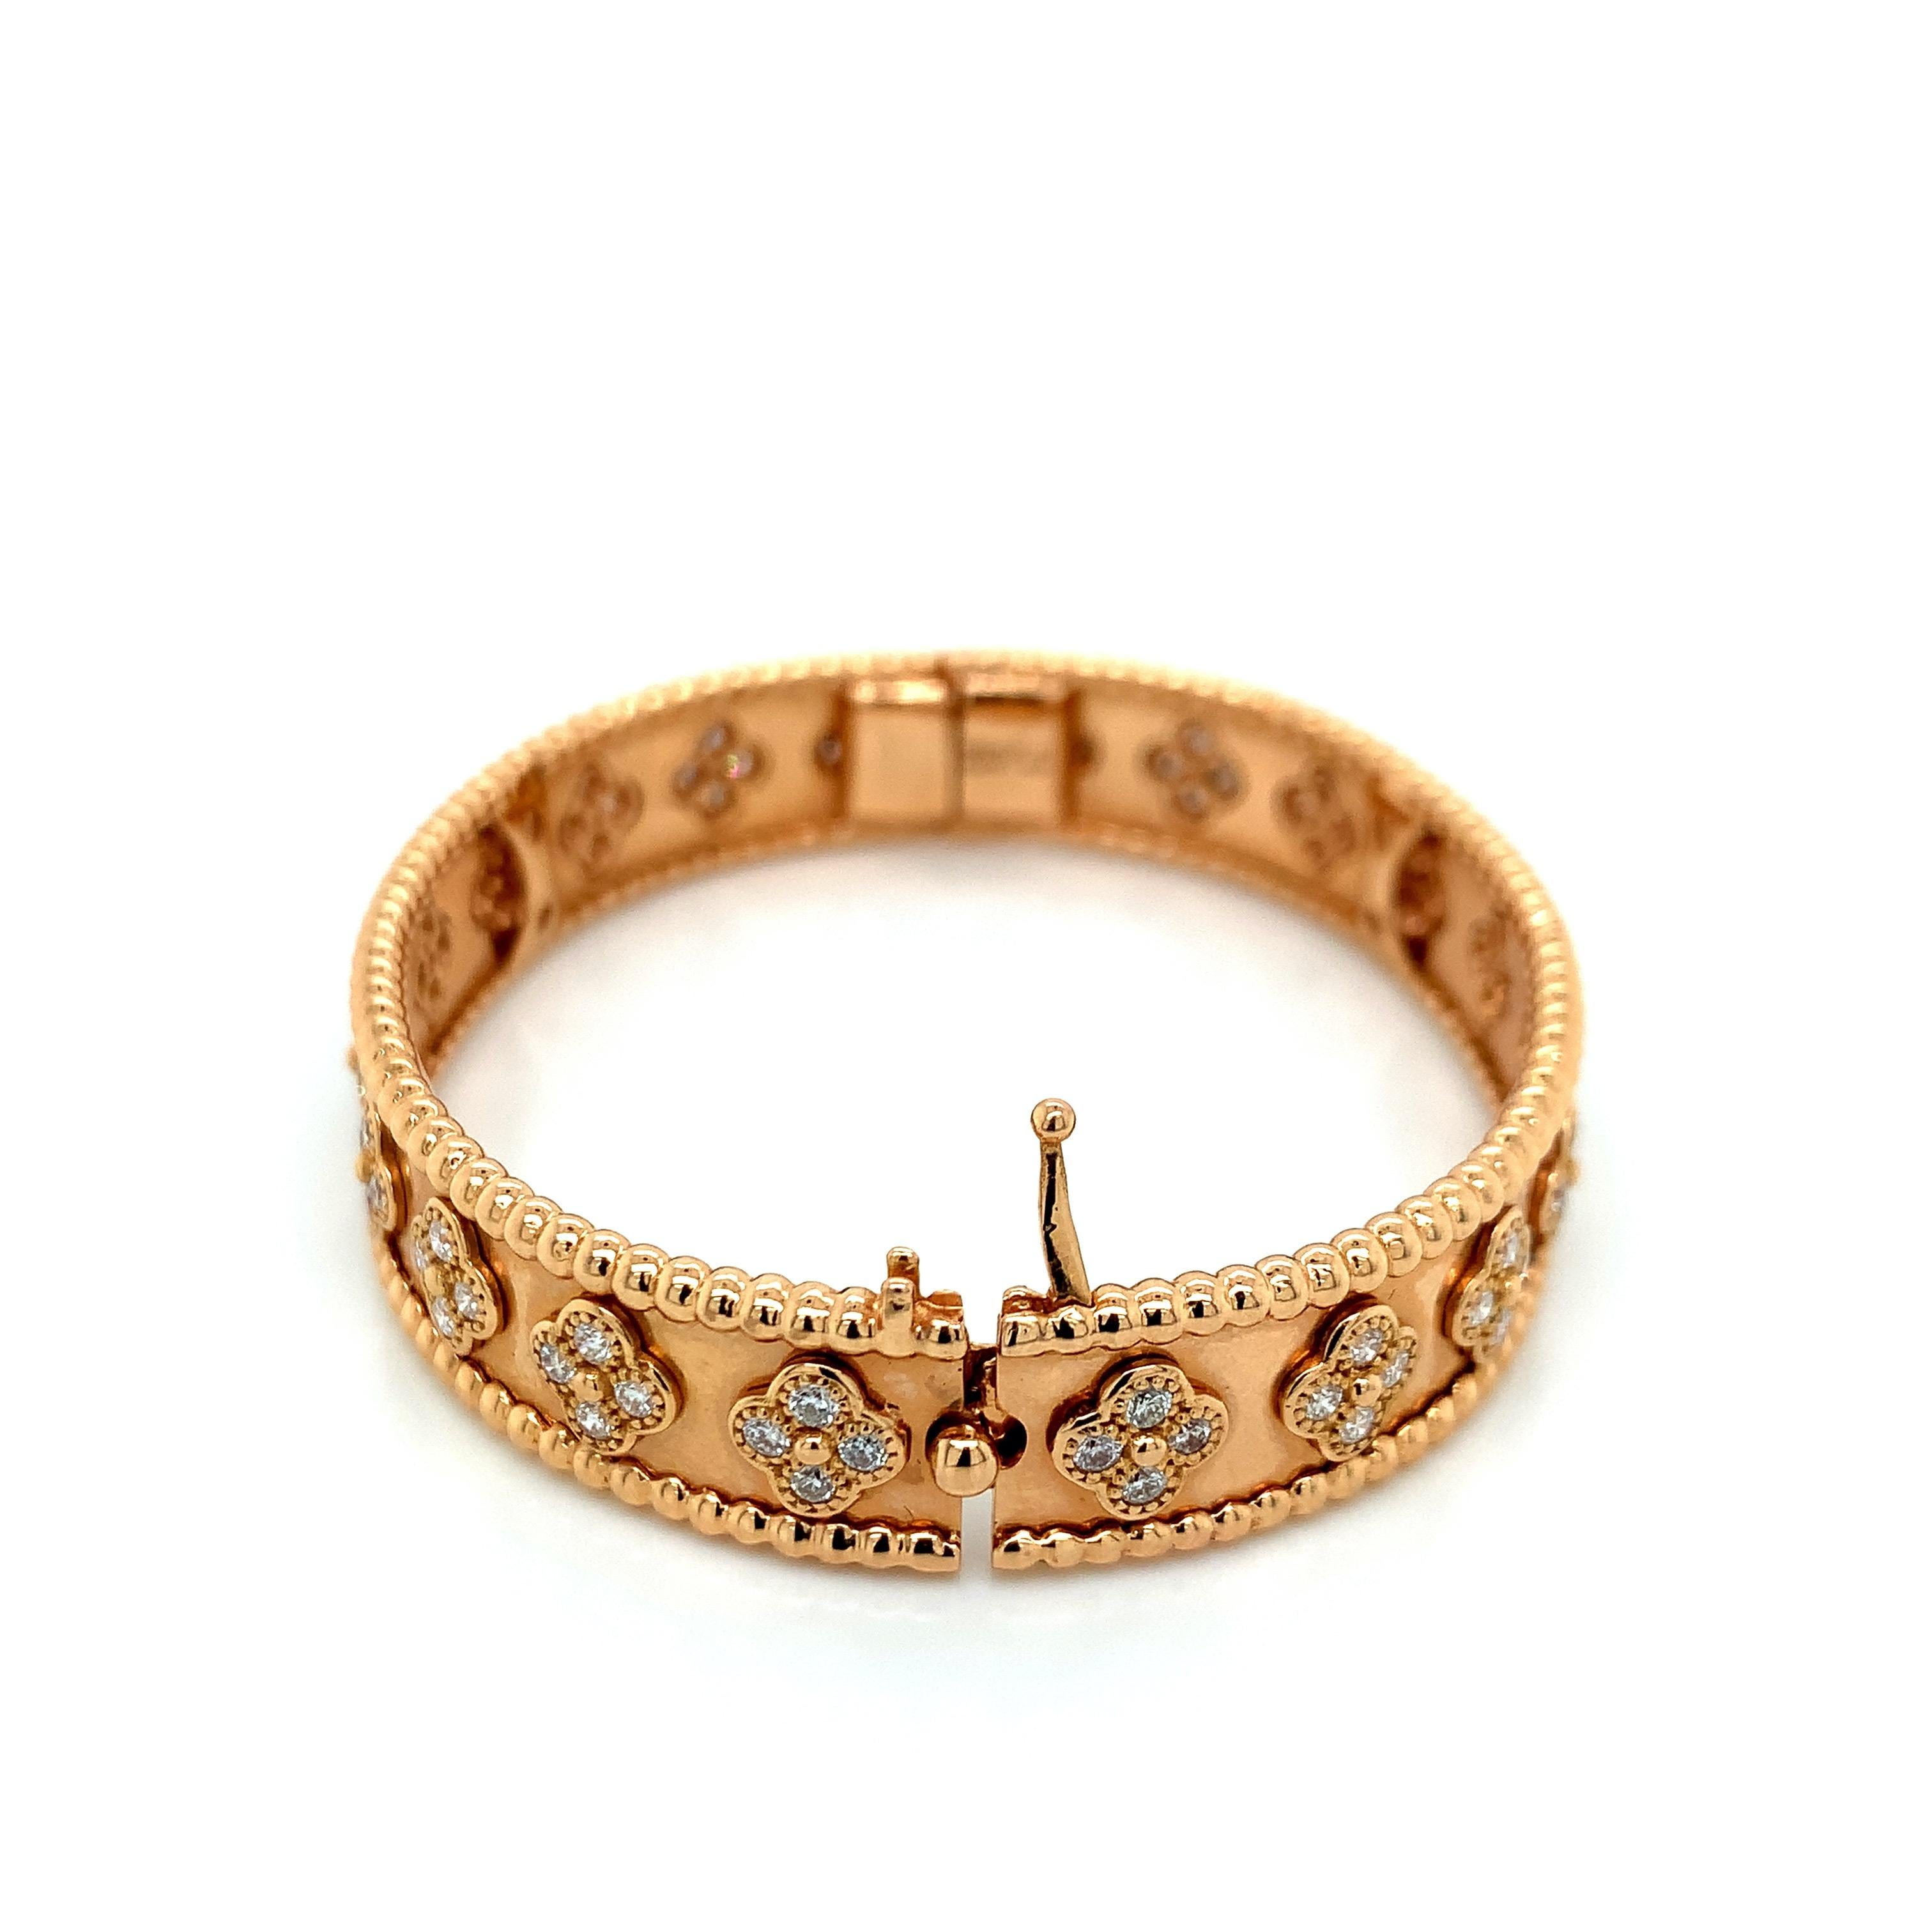 Van Cleef & Arpels 18 karat rose gold hinged bangle with 80 round brilliant cut diamonds weighing approximately 1.60 carat. Comes from VCA's Clover Perlée collection. Serial No. JE143288. Marked: VCA / Au750 / 16 / JE143288. Total weight: 36.4